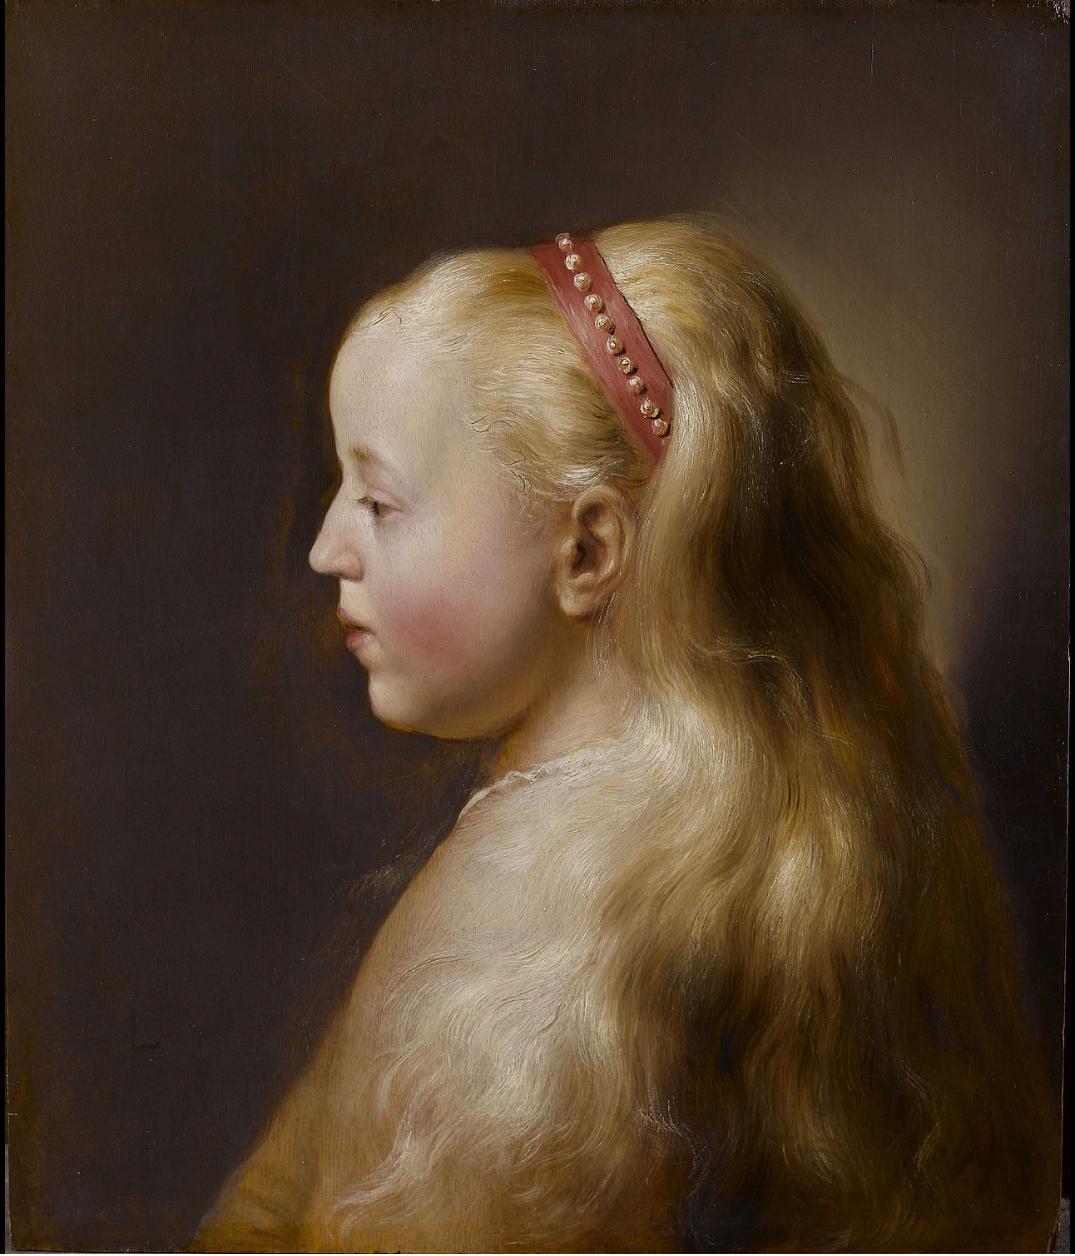 A young girl, Jan Lievens